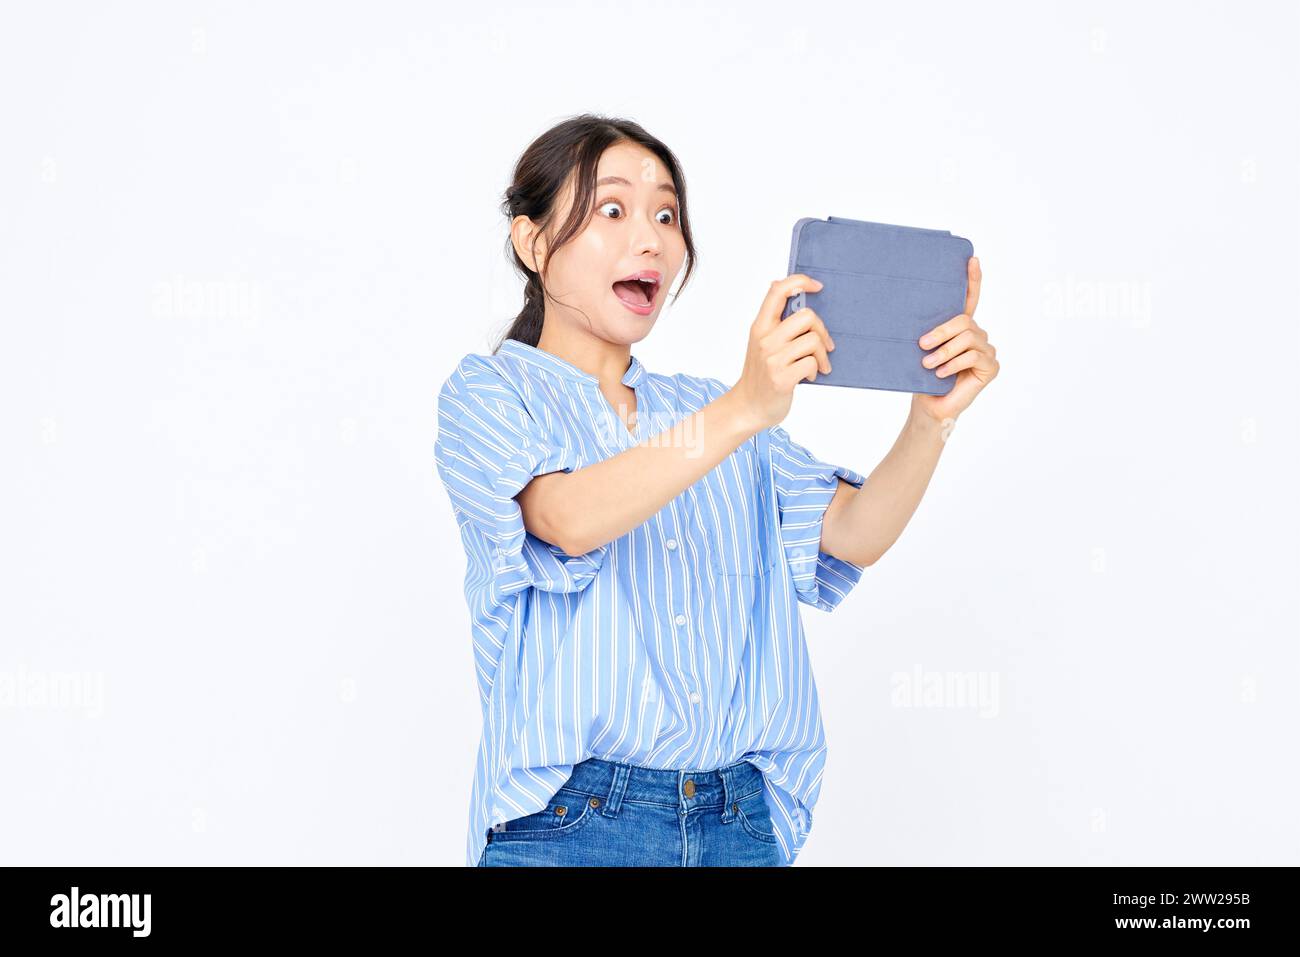 A woman holding a tablet and looking surprised Stock Photo